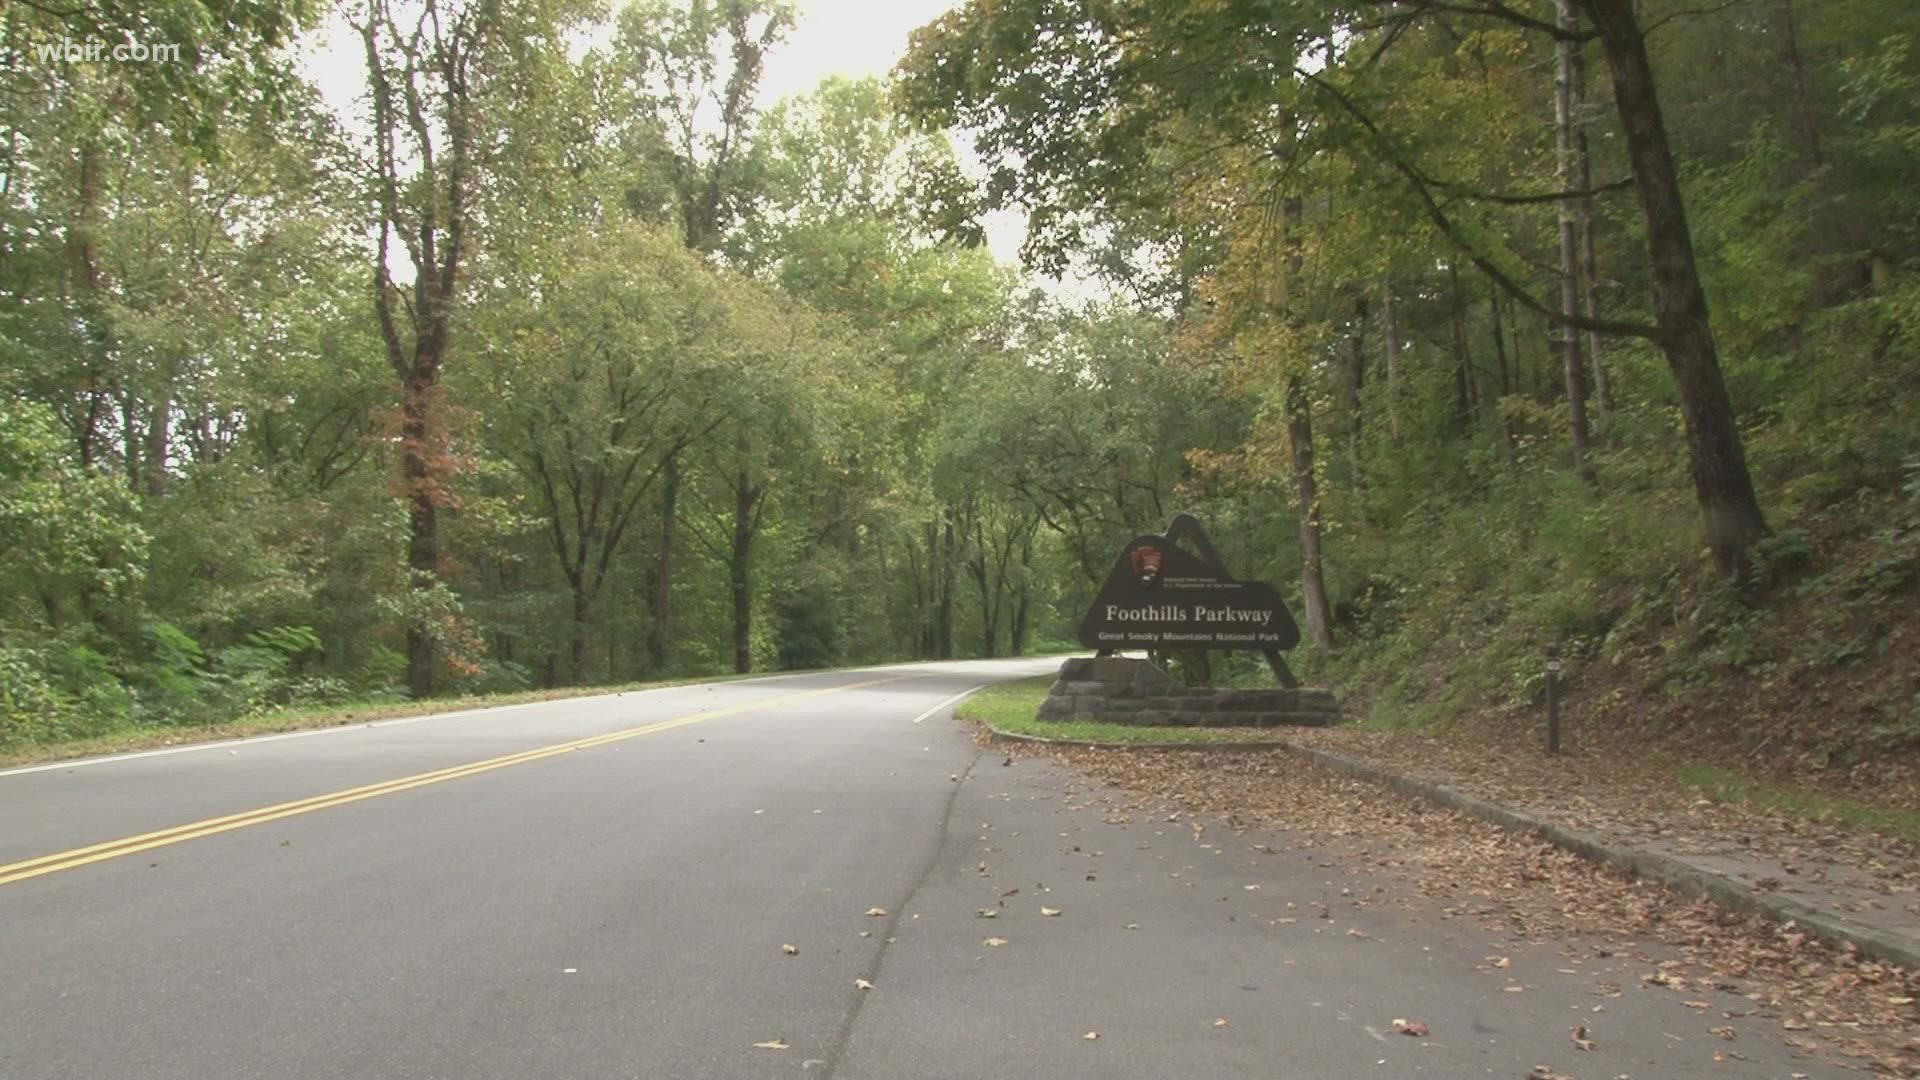 The park is repaving and repairing a 17-mile stretch of the parkway from Chilhowee Lake to Walland, and work is expected to last until May 2023.